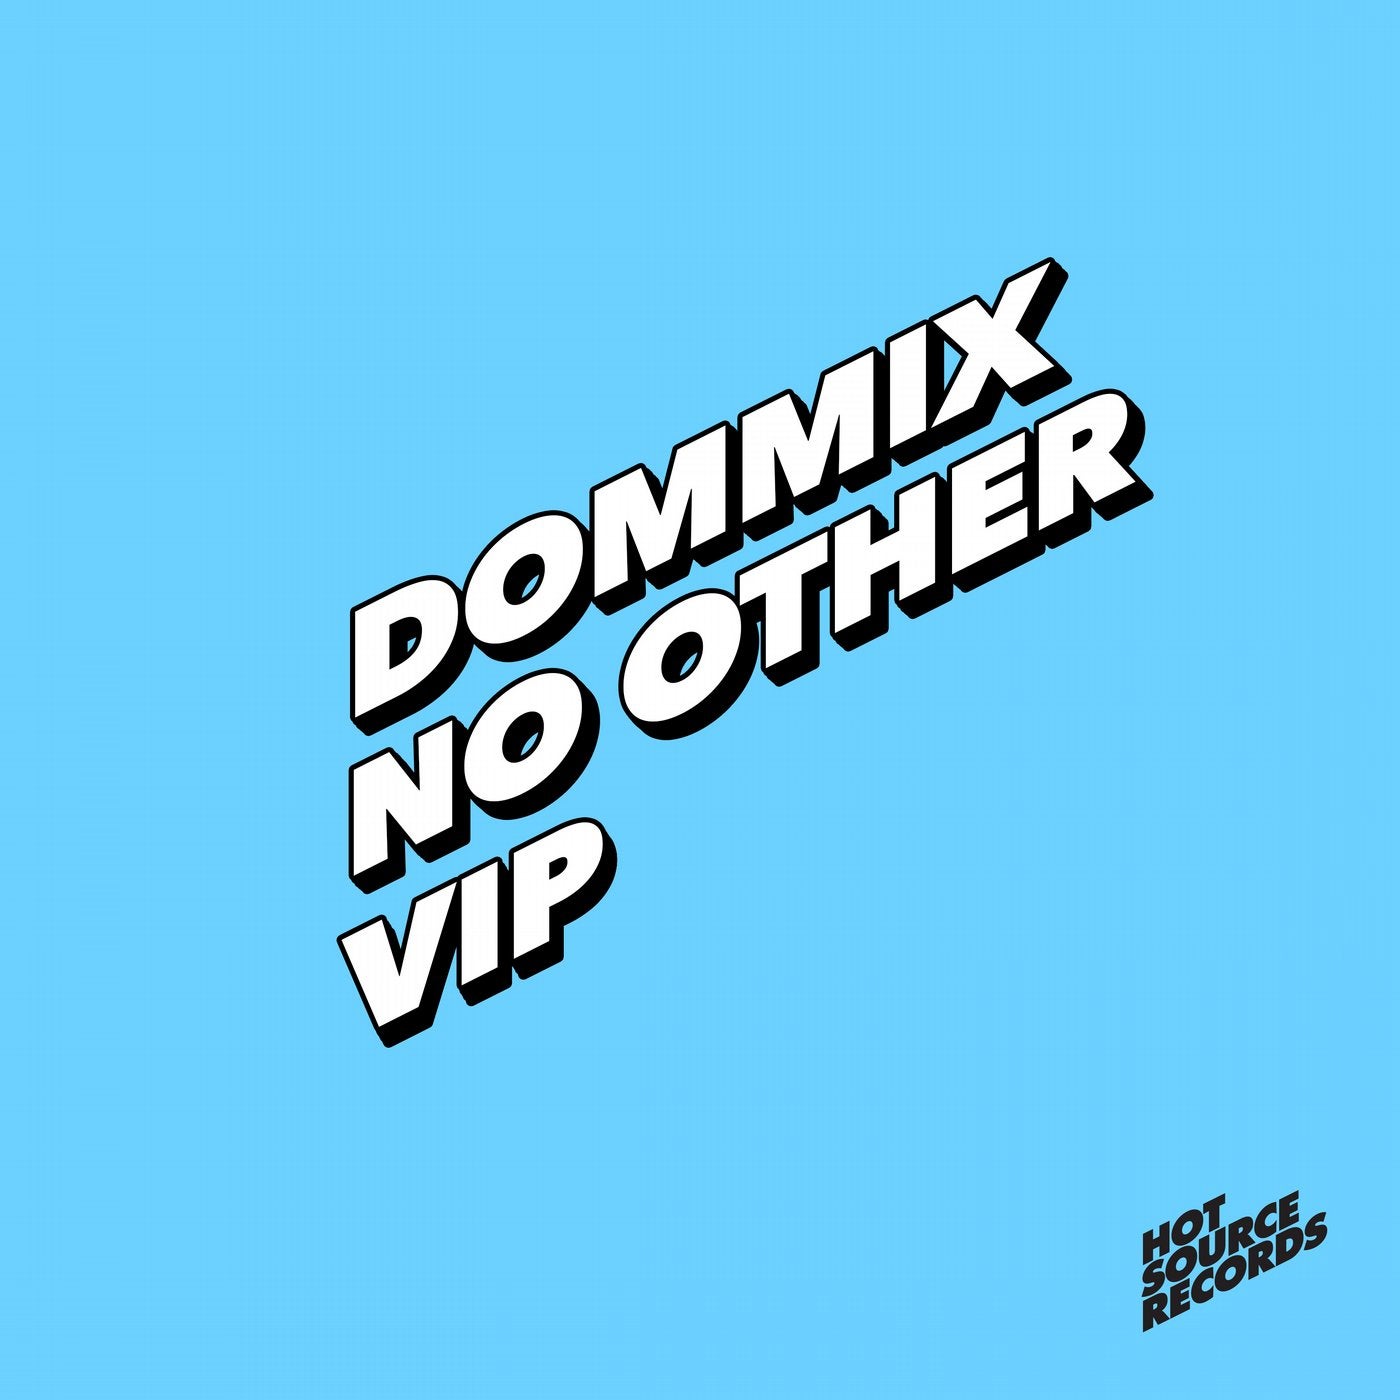 No Other (VIP)